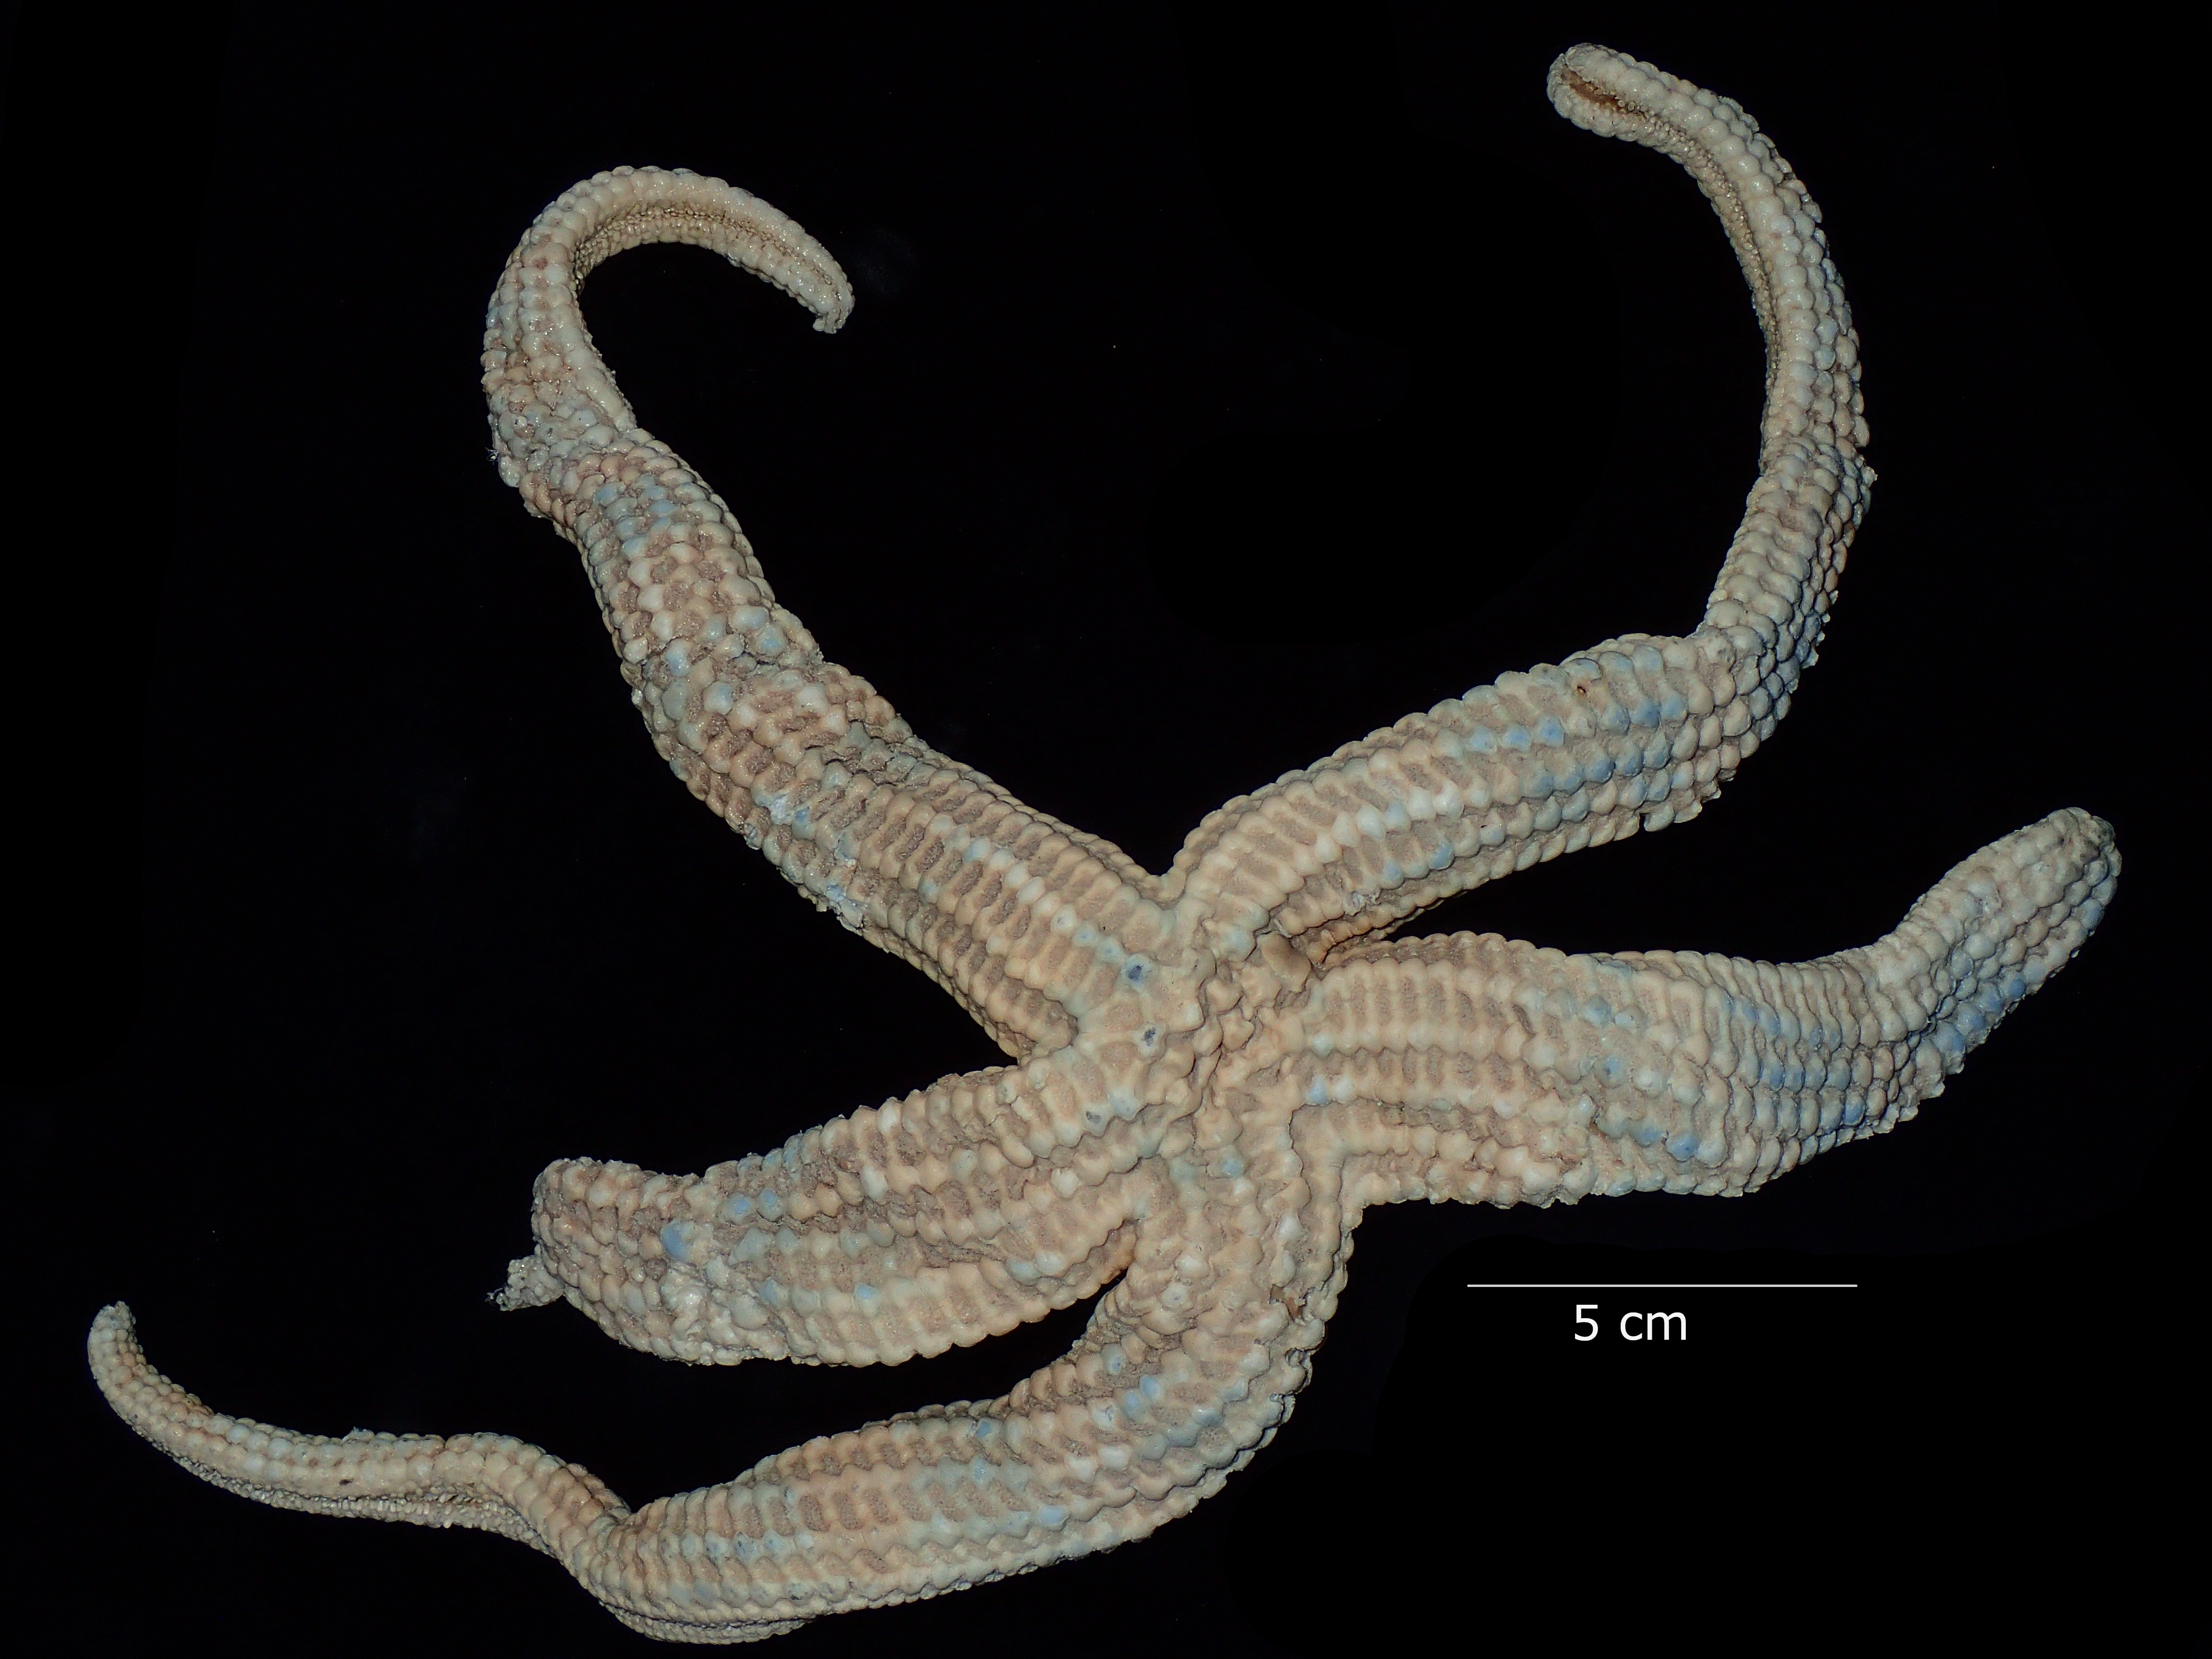 Ophidiaster helicostichus Sladen, 1889 [holotype of Ophidiaster astridae Engel, 1938]